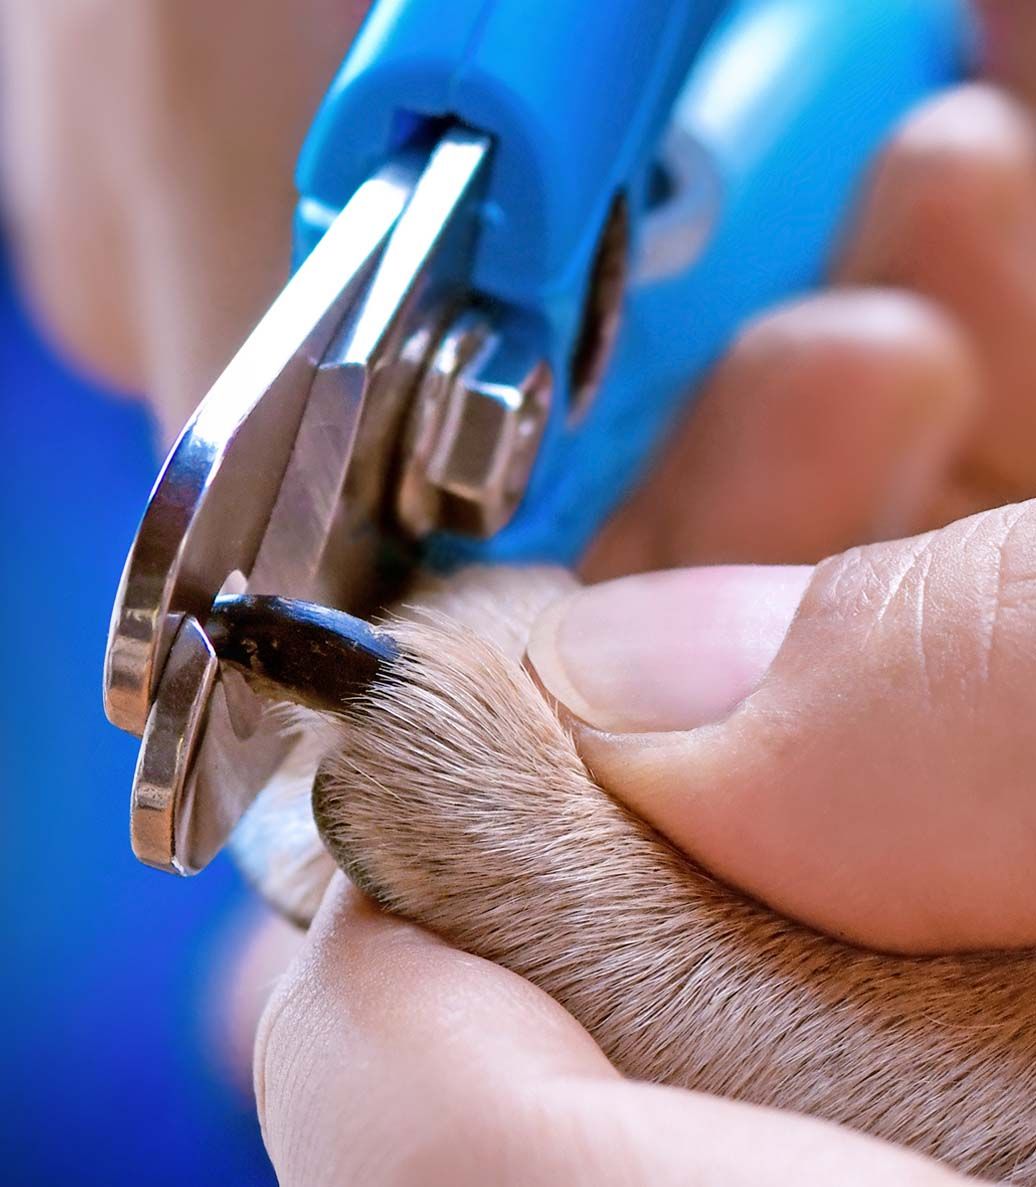 health - Did the vet cut my dog's nails too short? - Pets Stack Exchange